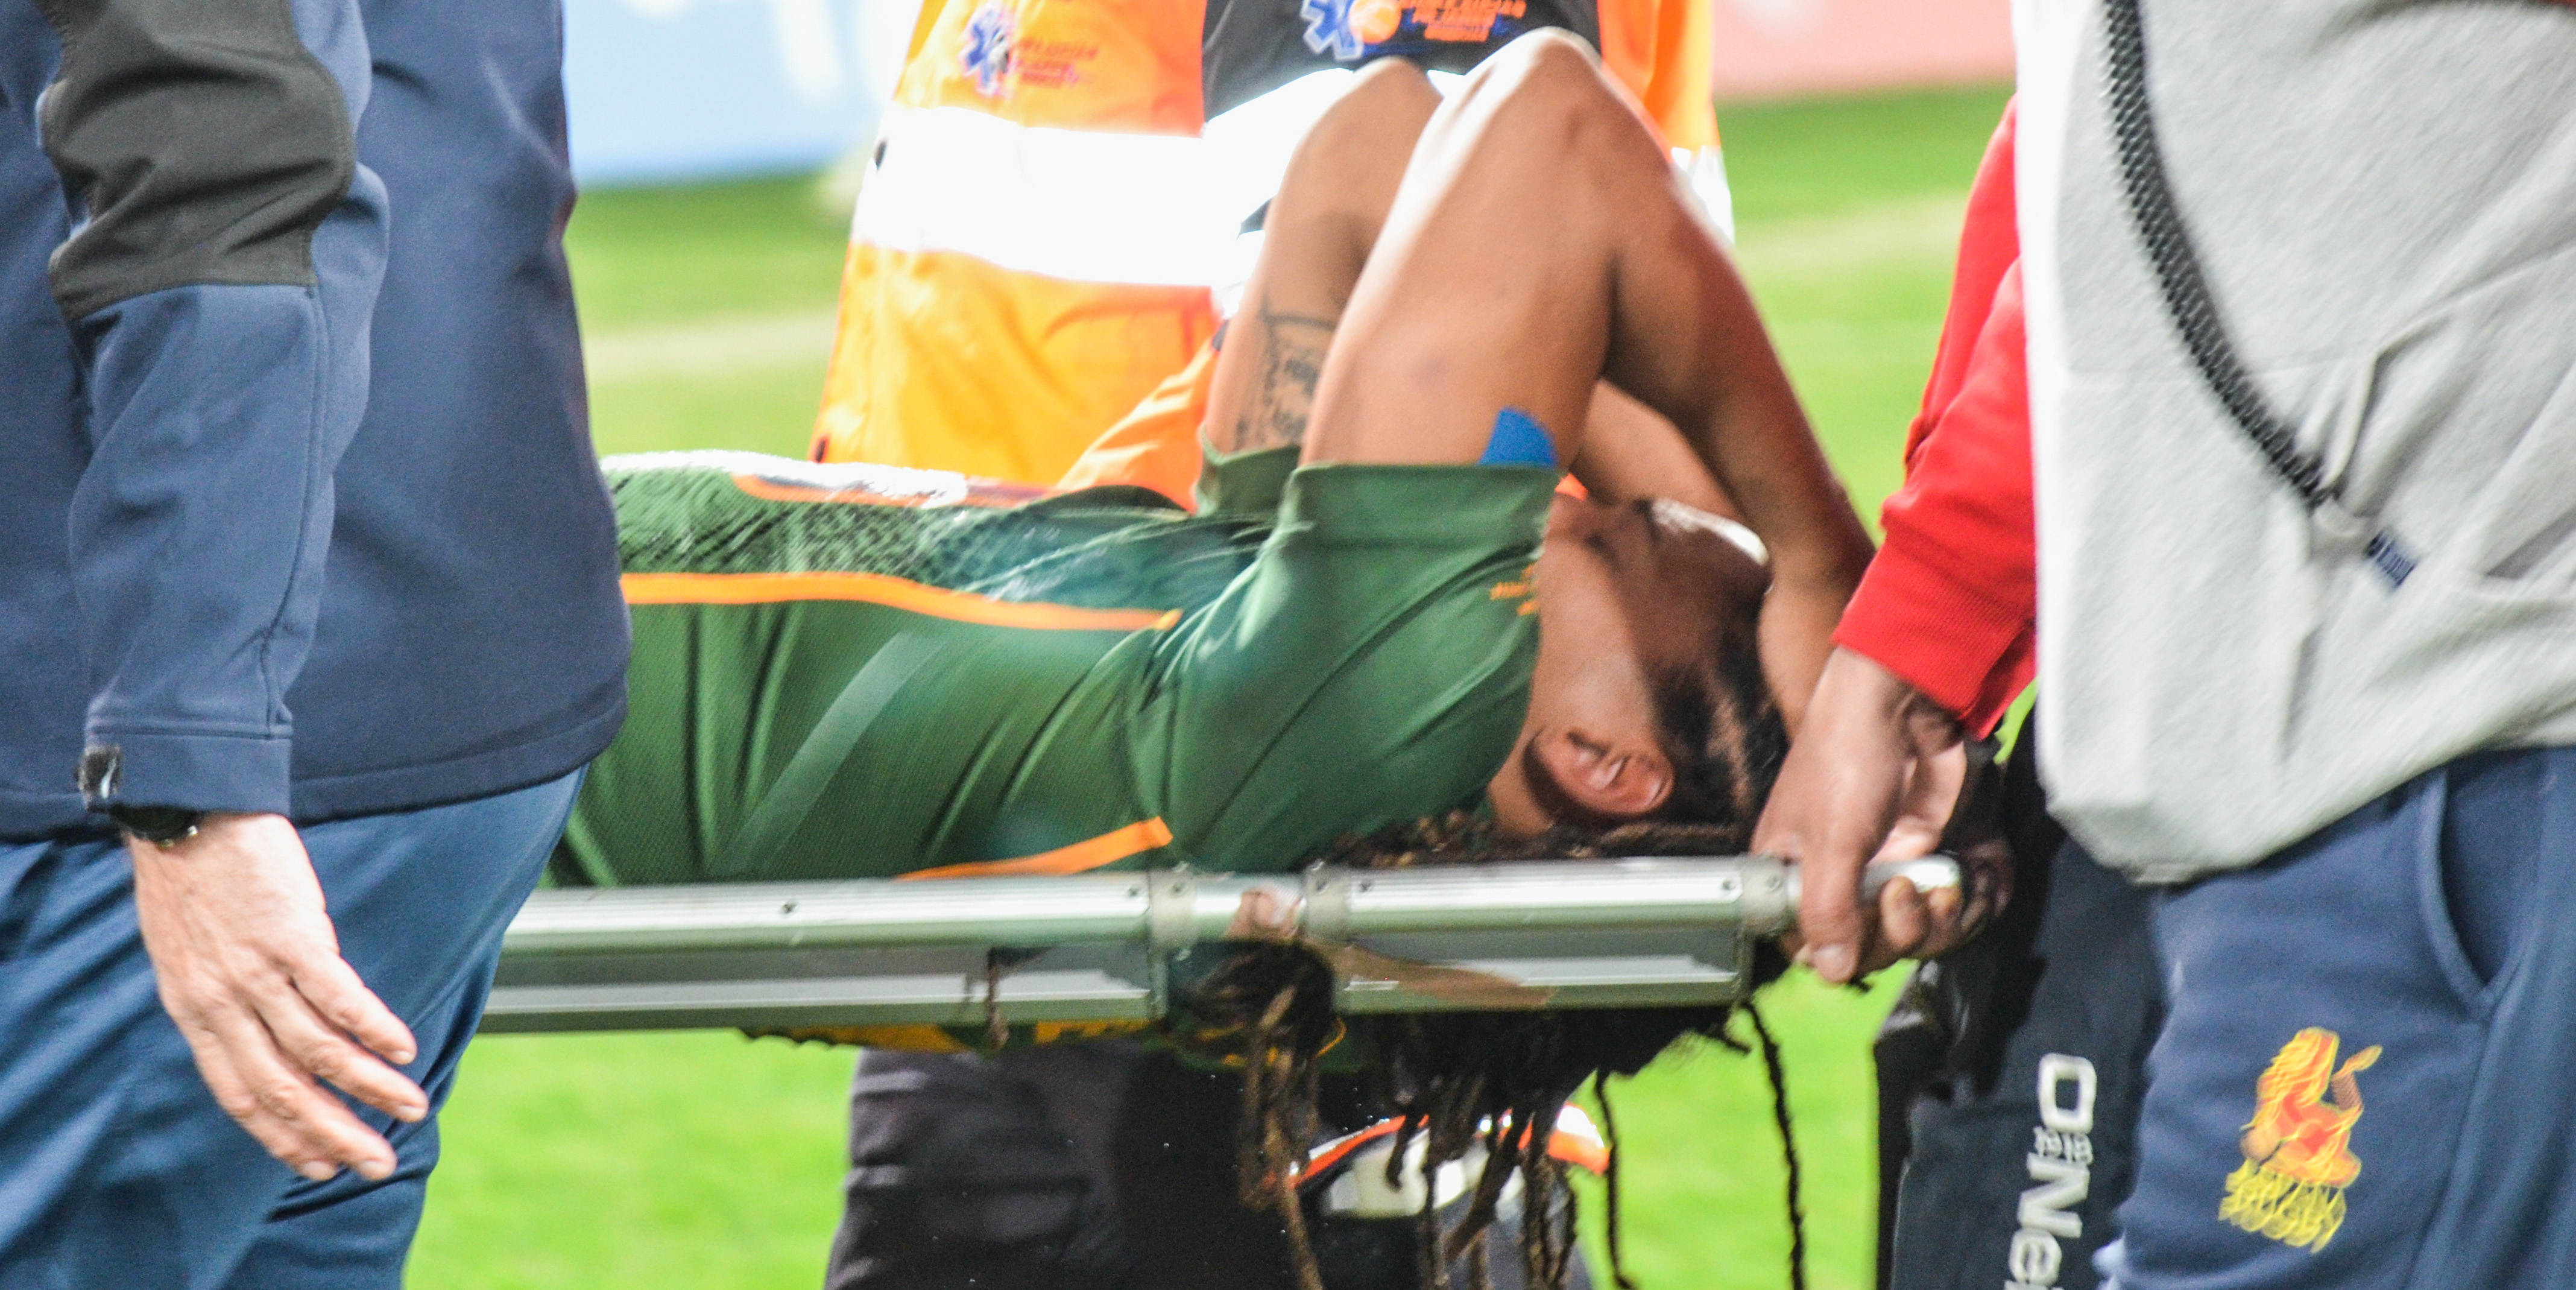 Justin Geduld is carried off the field in Seville last January after seriously injuring his knee.